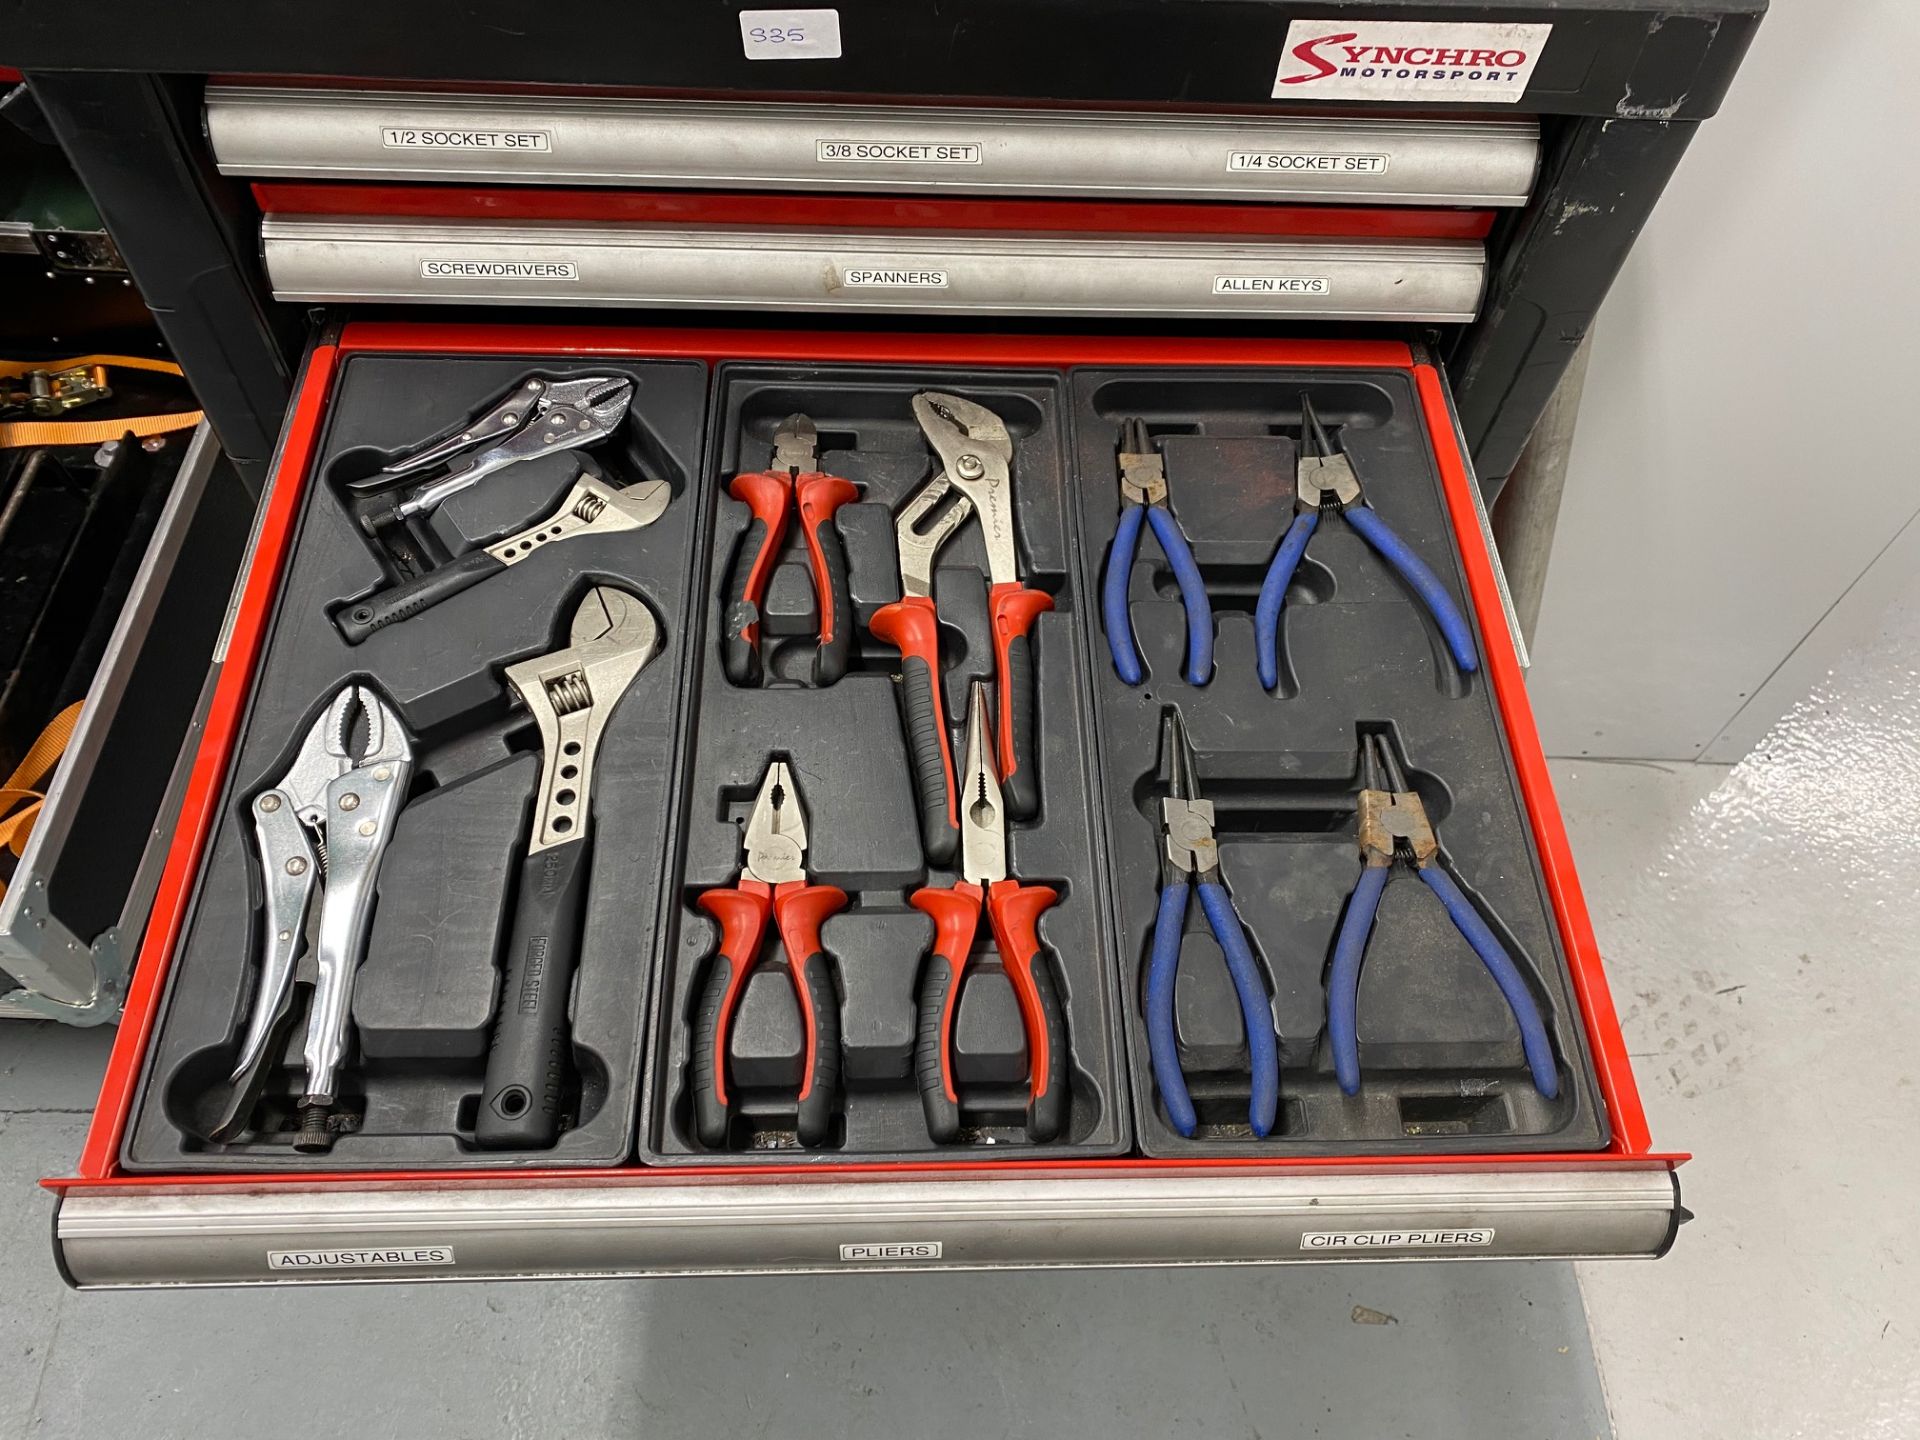 Sealey Premier 8 drawer mobile toolbox including the following tools, metric sockets 10-32mm, 1/ - Bild 4 aus 10